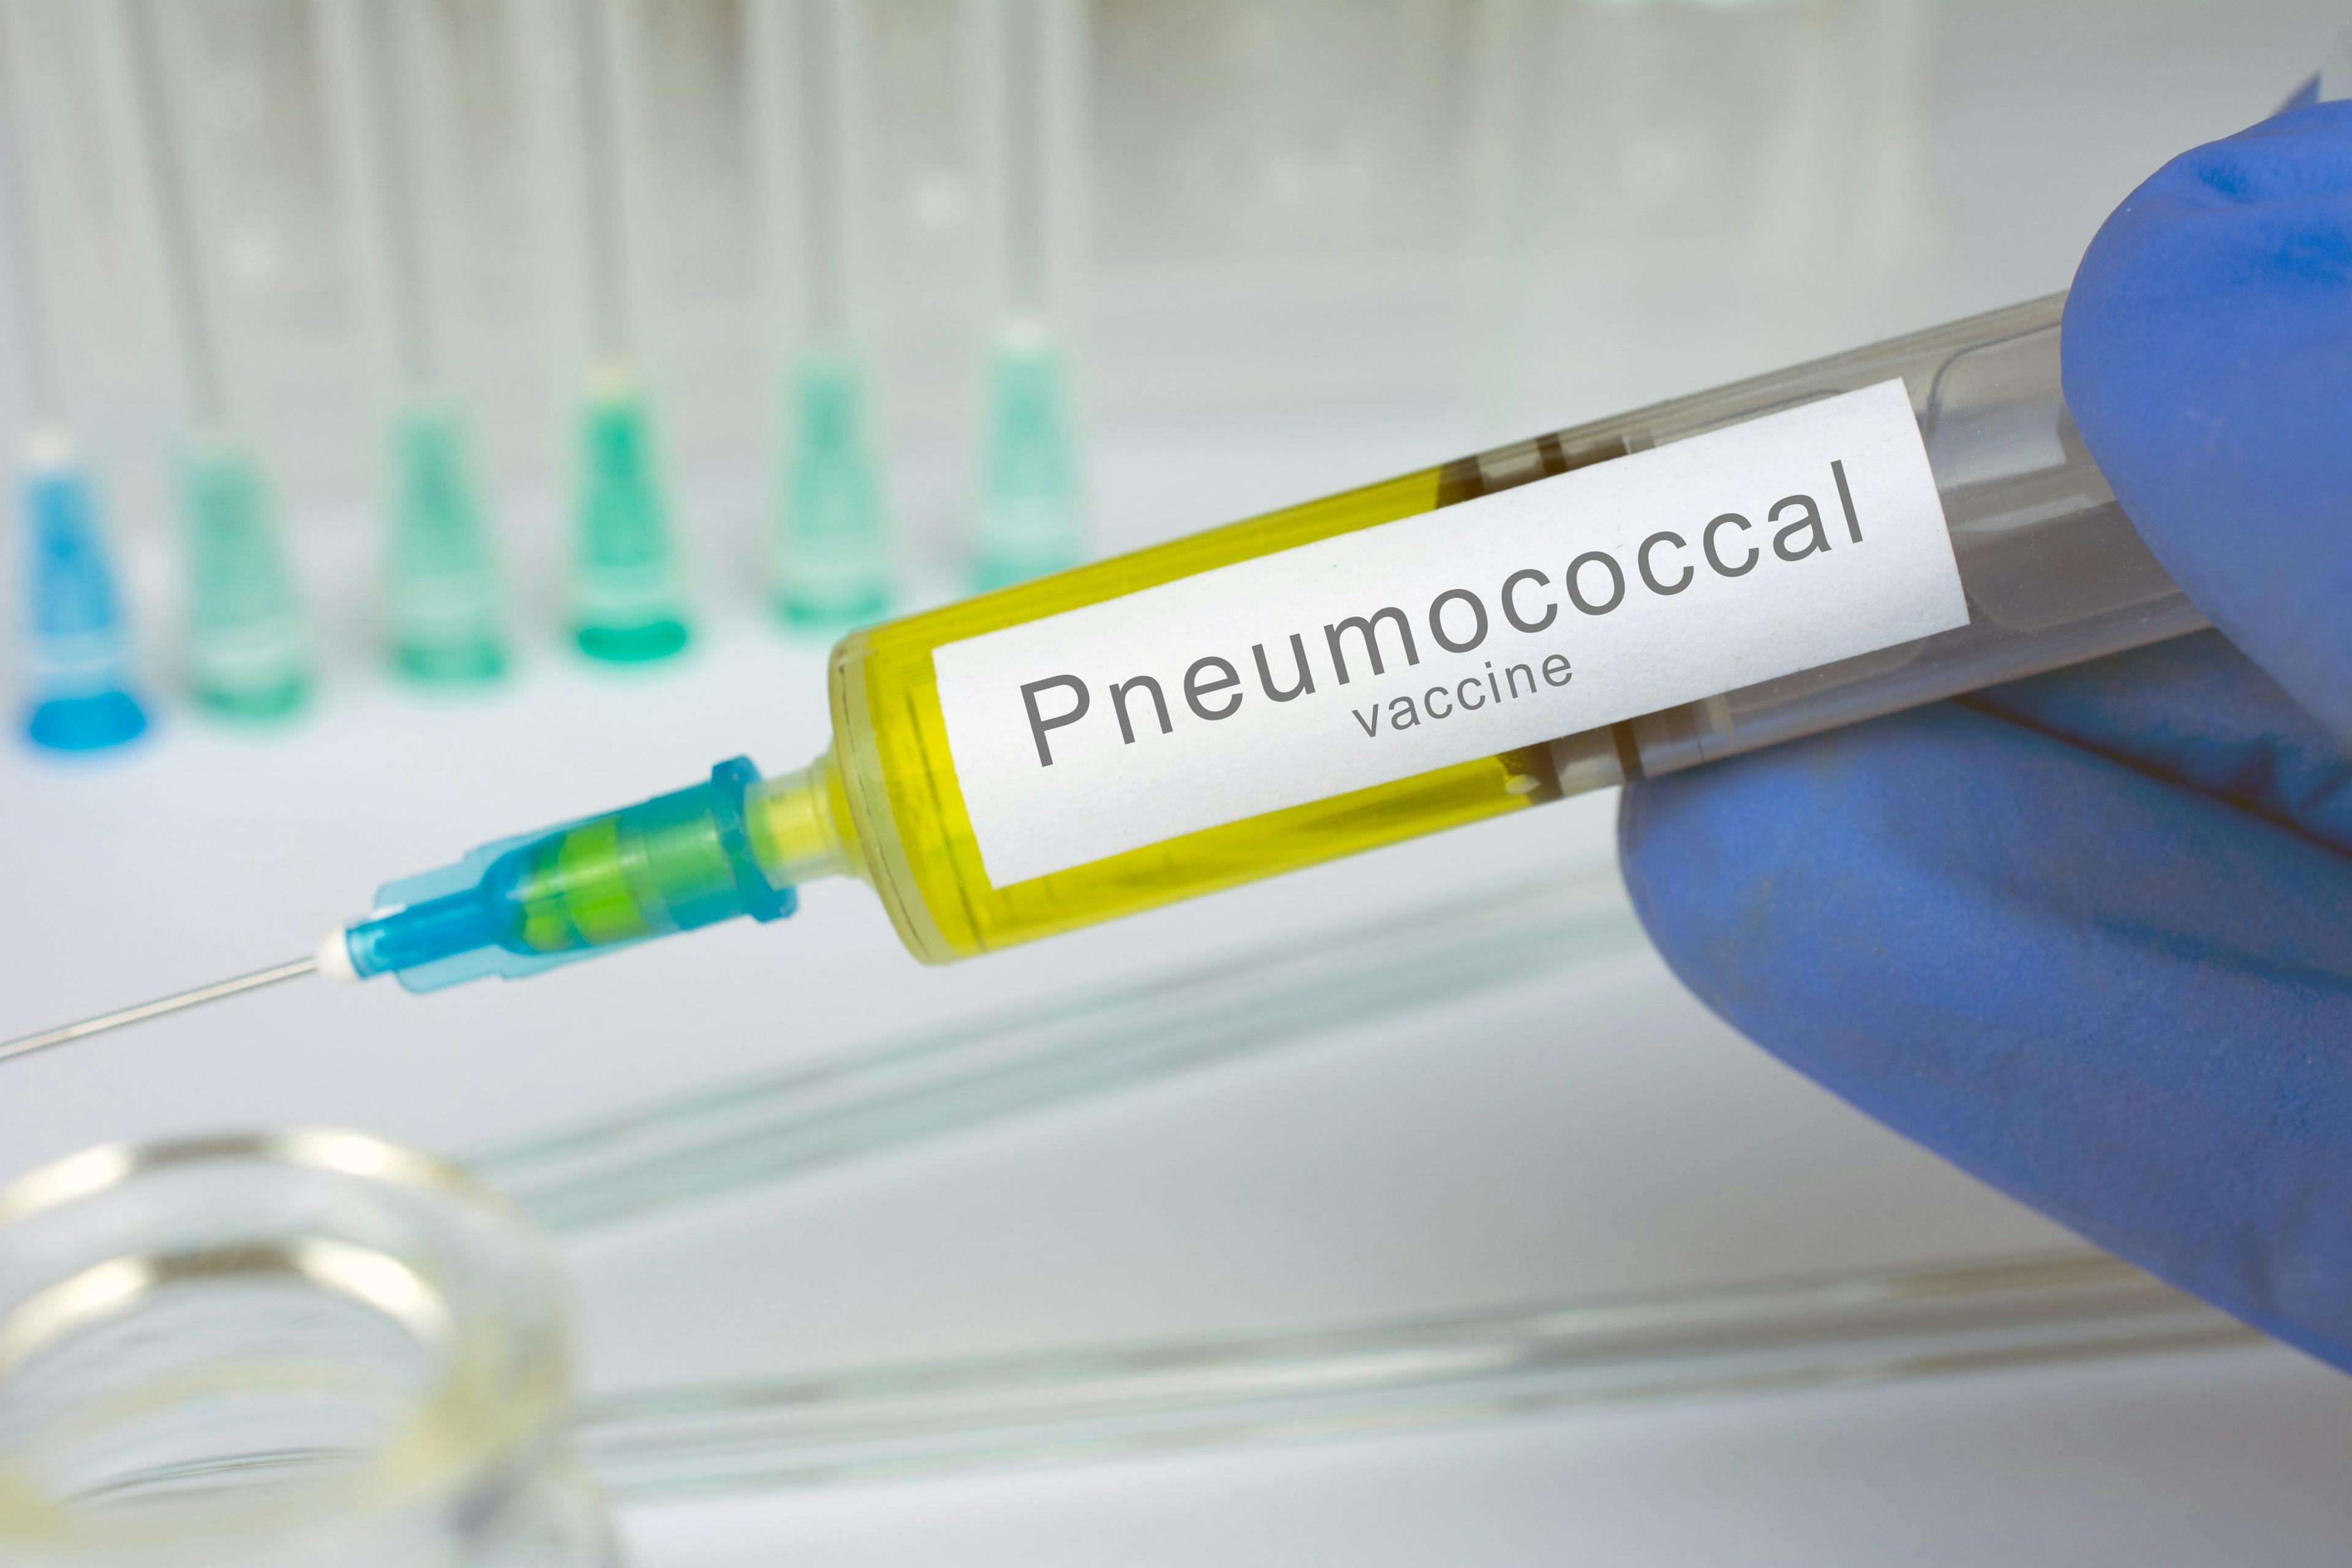 ands of doctor or nurse in medical gloves with medical syringe ready for injection a shot of Pneumococcal vaccine | Image Credit: SecondSide - stock.adobe.com